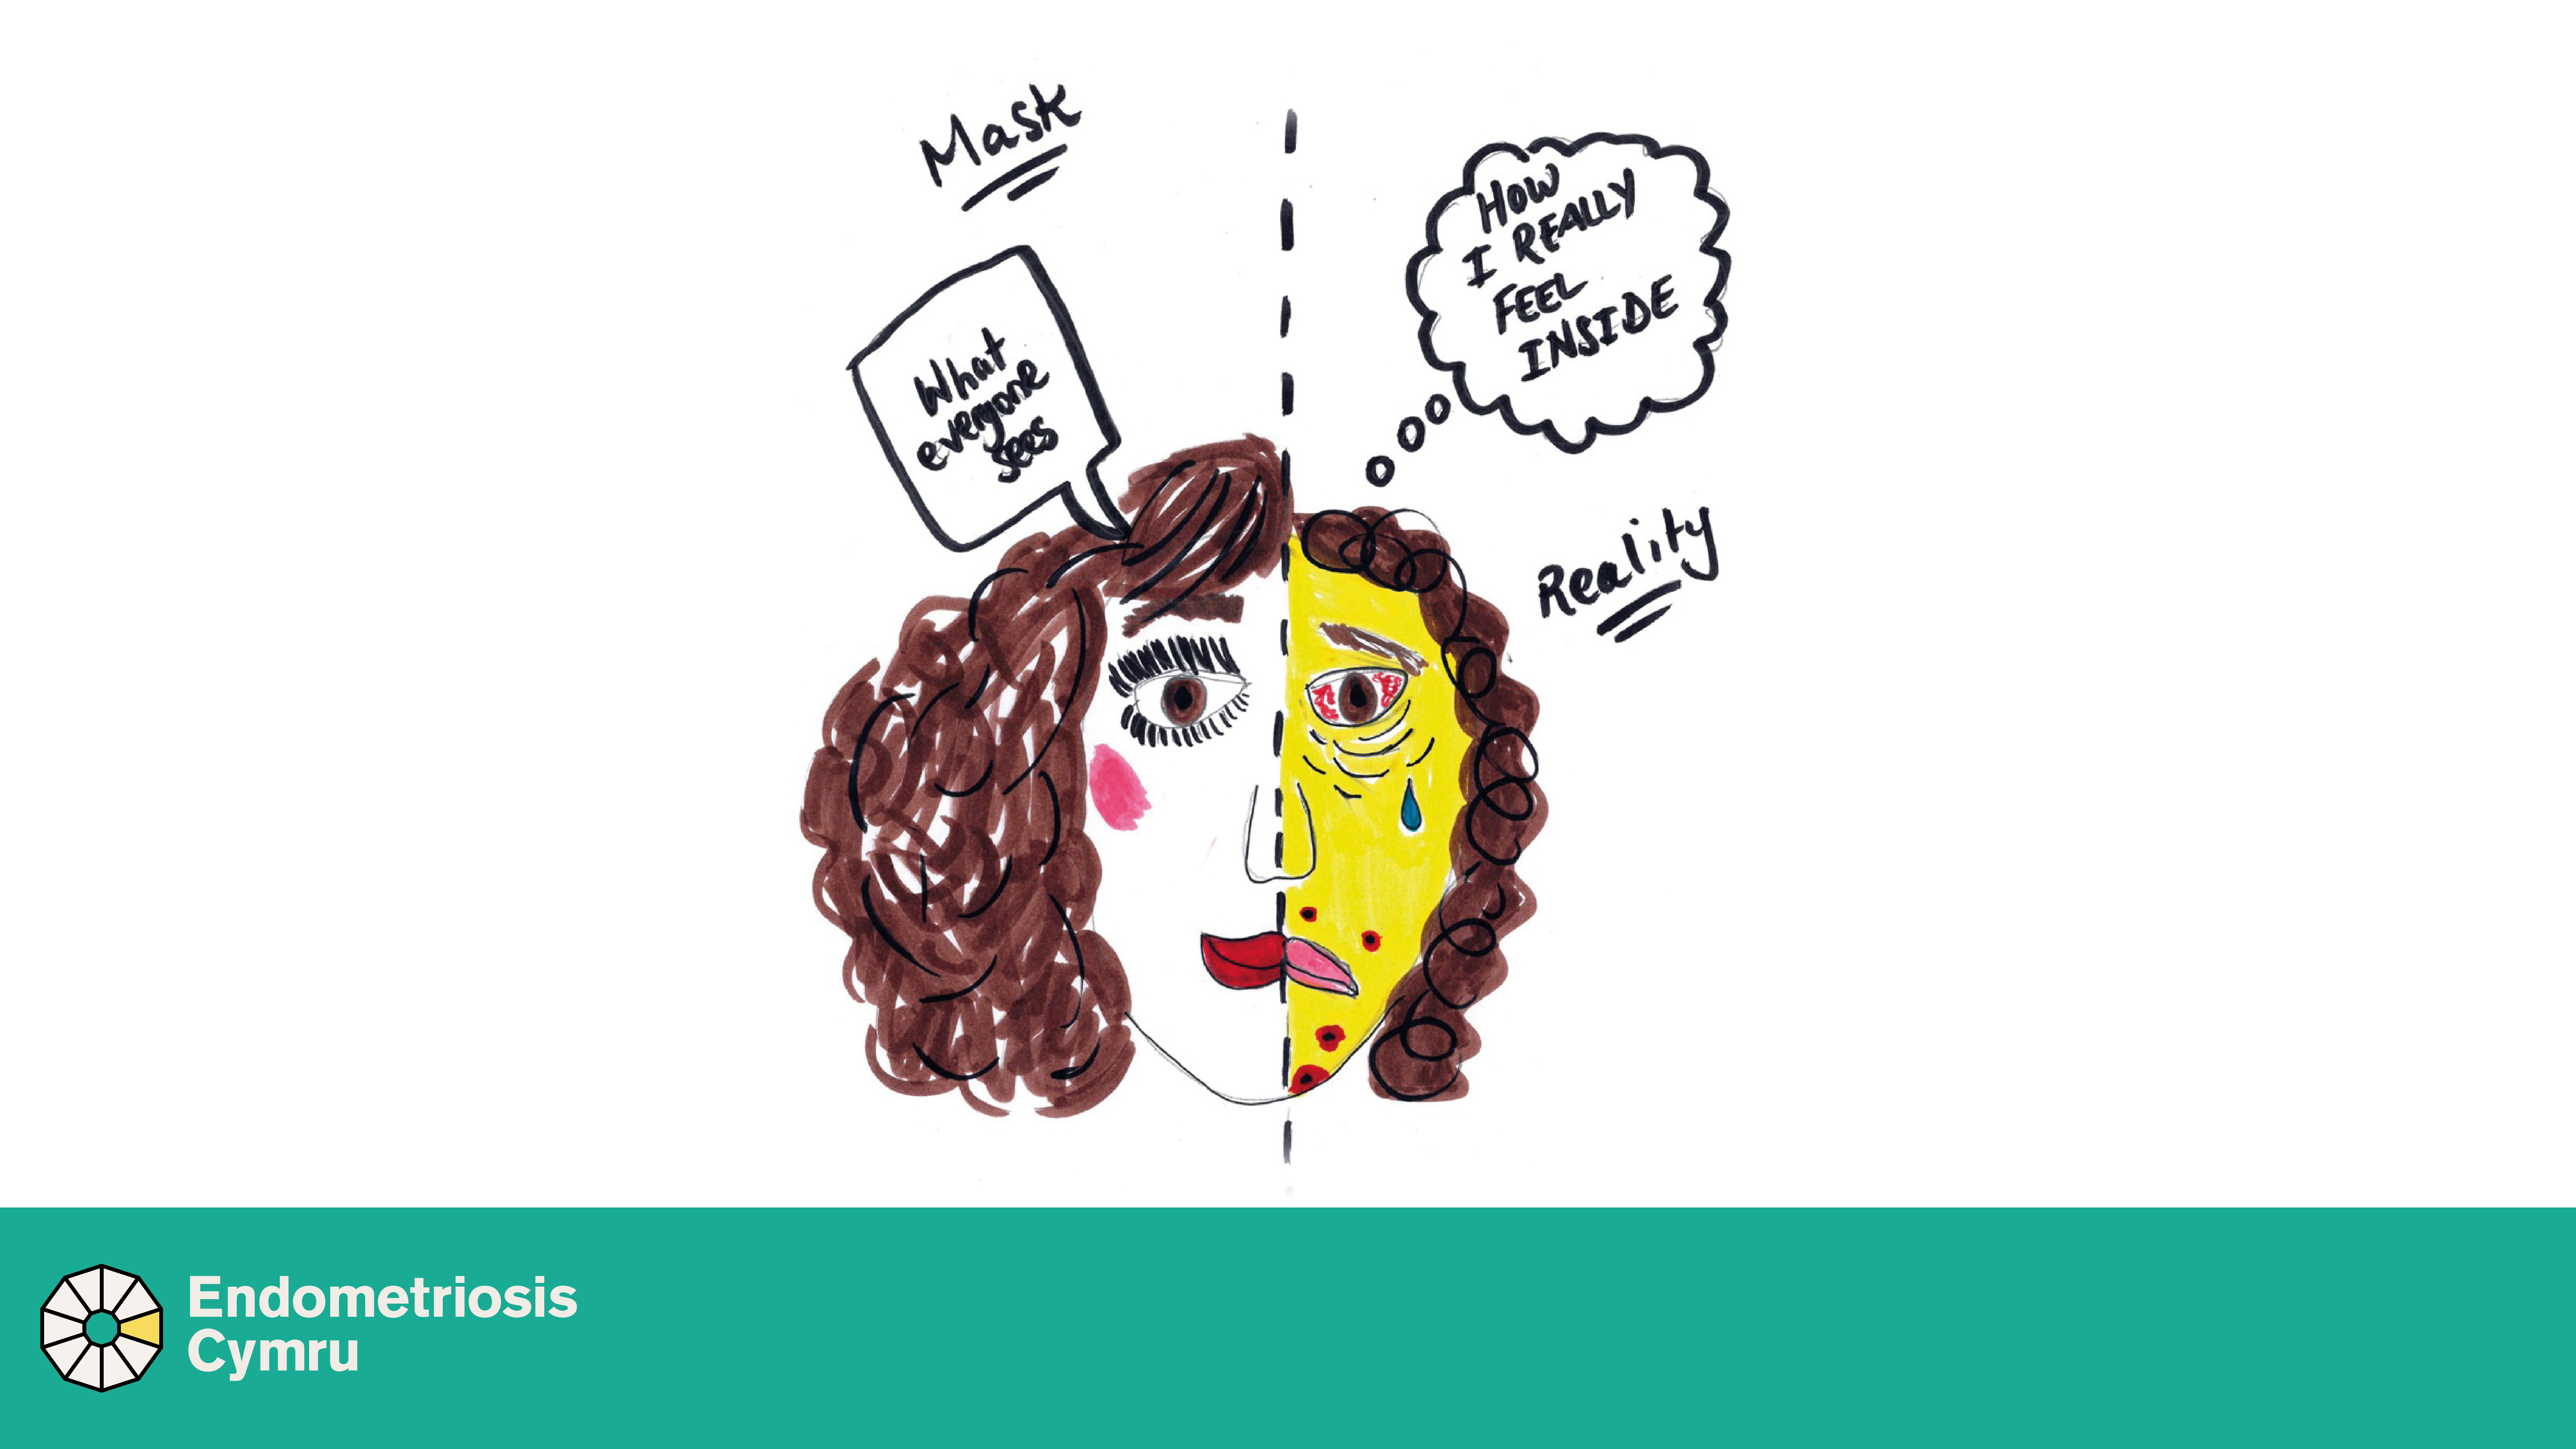 Drawing of a woman's face divided into 2 halves. On the left - labelled "Mask - What people see" the face is smiling and wearing makeup. On the right, the face is yellow with bags under the eyes and sores is labelled "Reality - How I really feel inside".